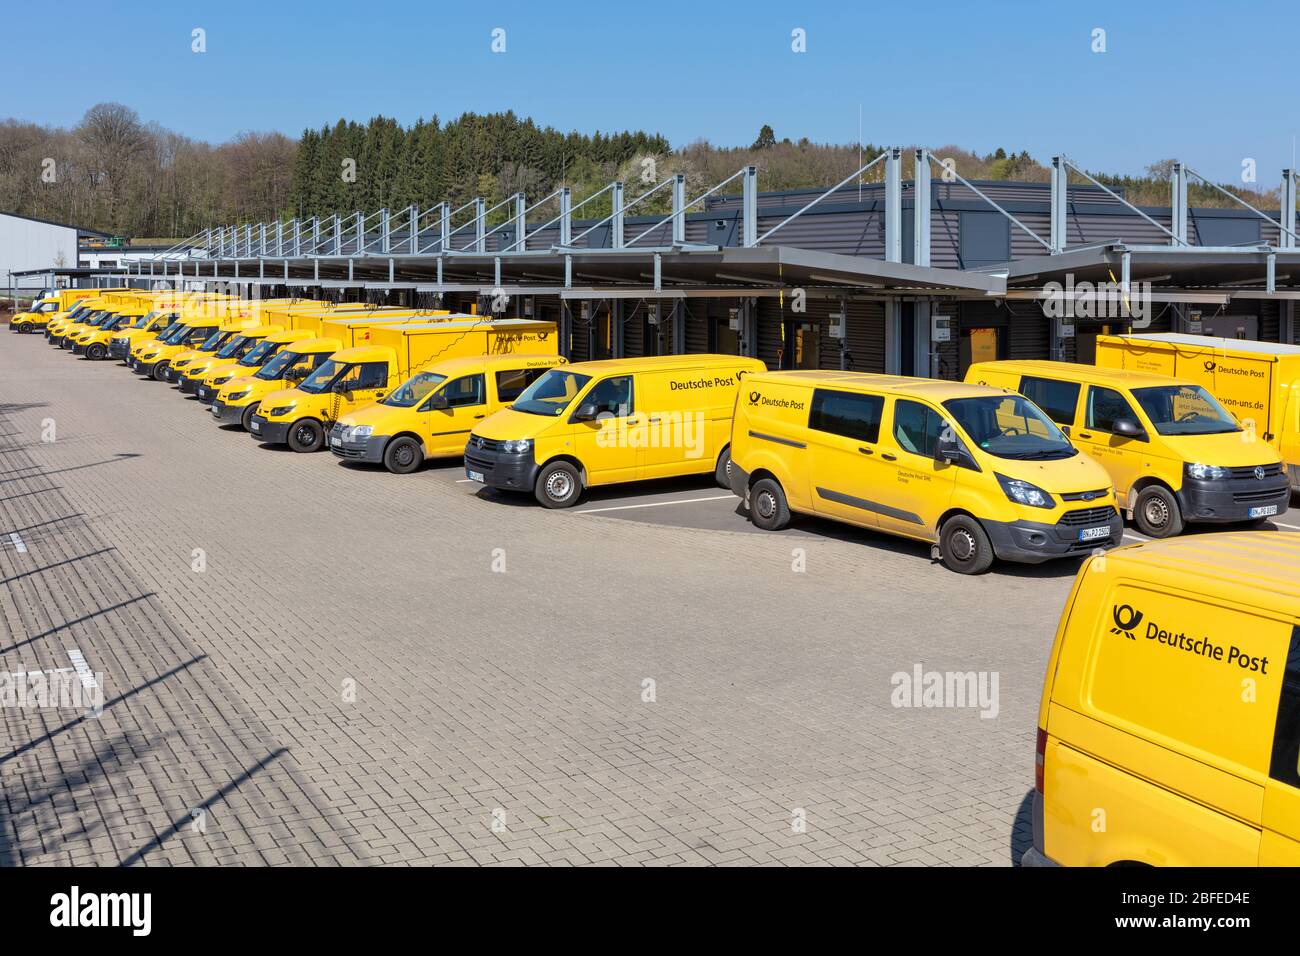 Deutsche Post delivery vans at depot. Deutsche Post is a brand of Deutsche Post AG used for its domestic mail services in Germany. Stock Photo